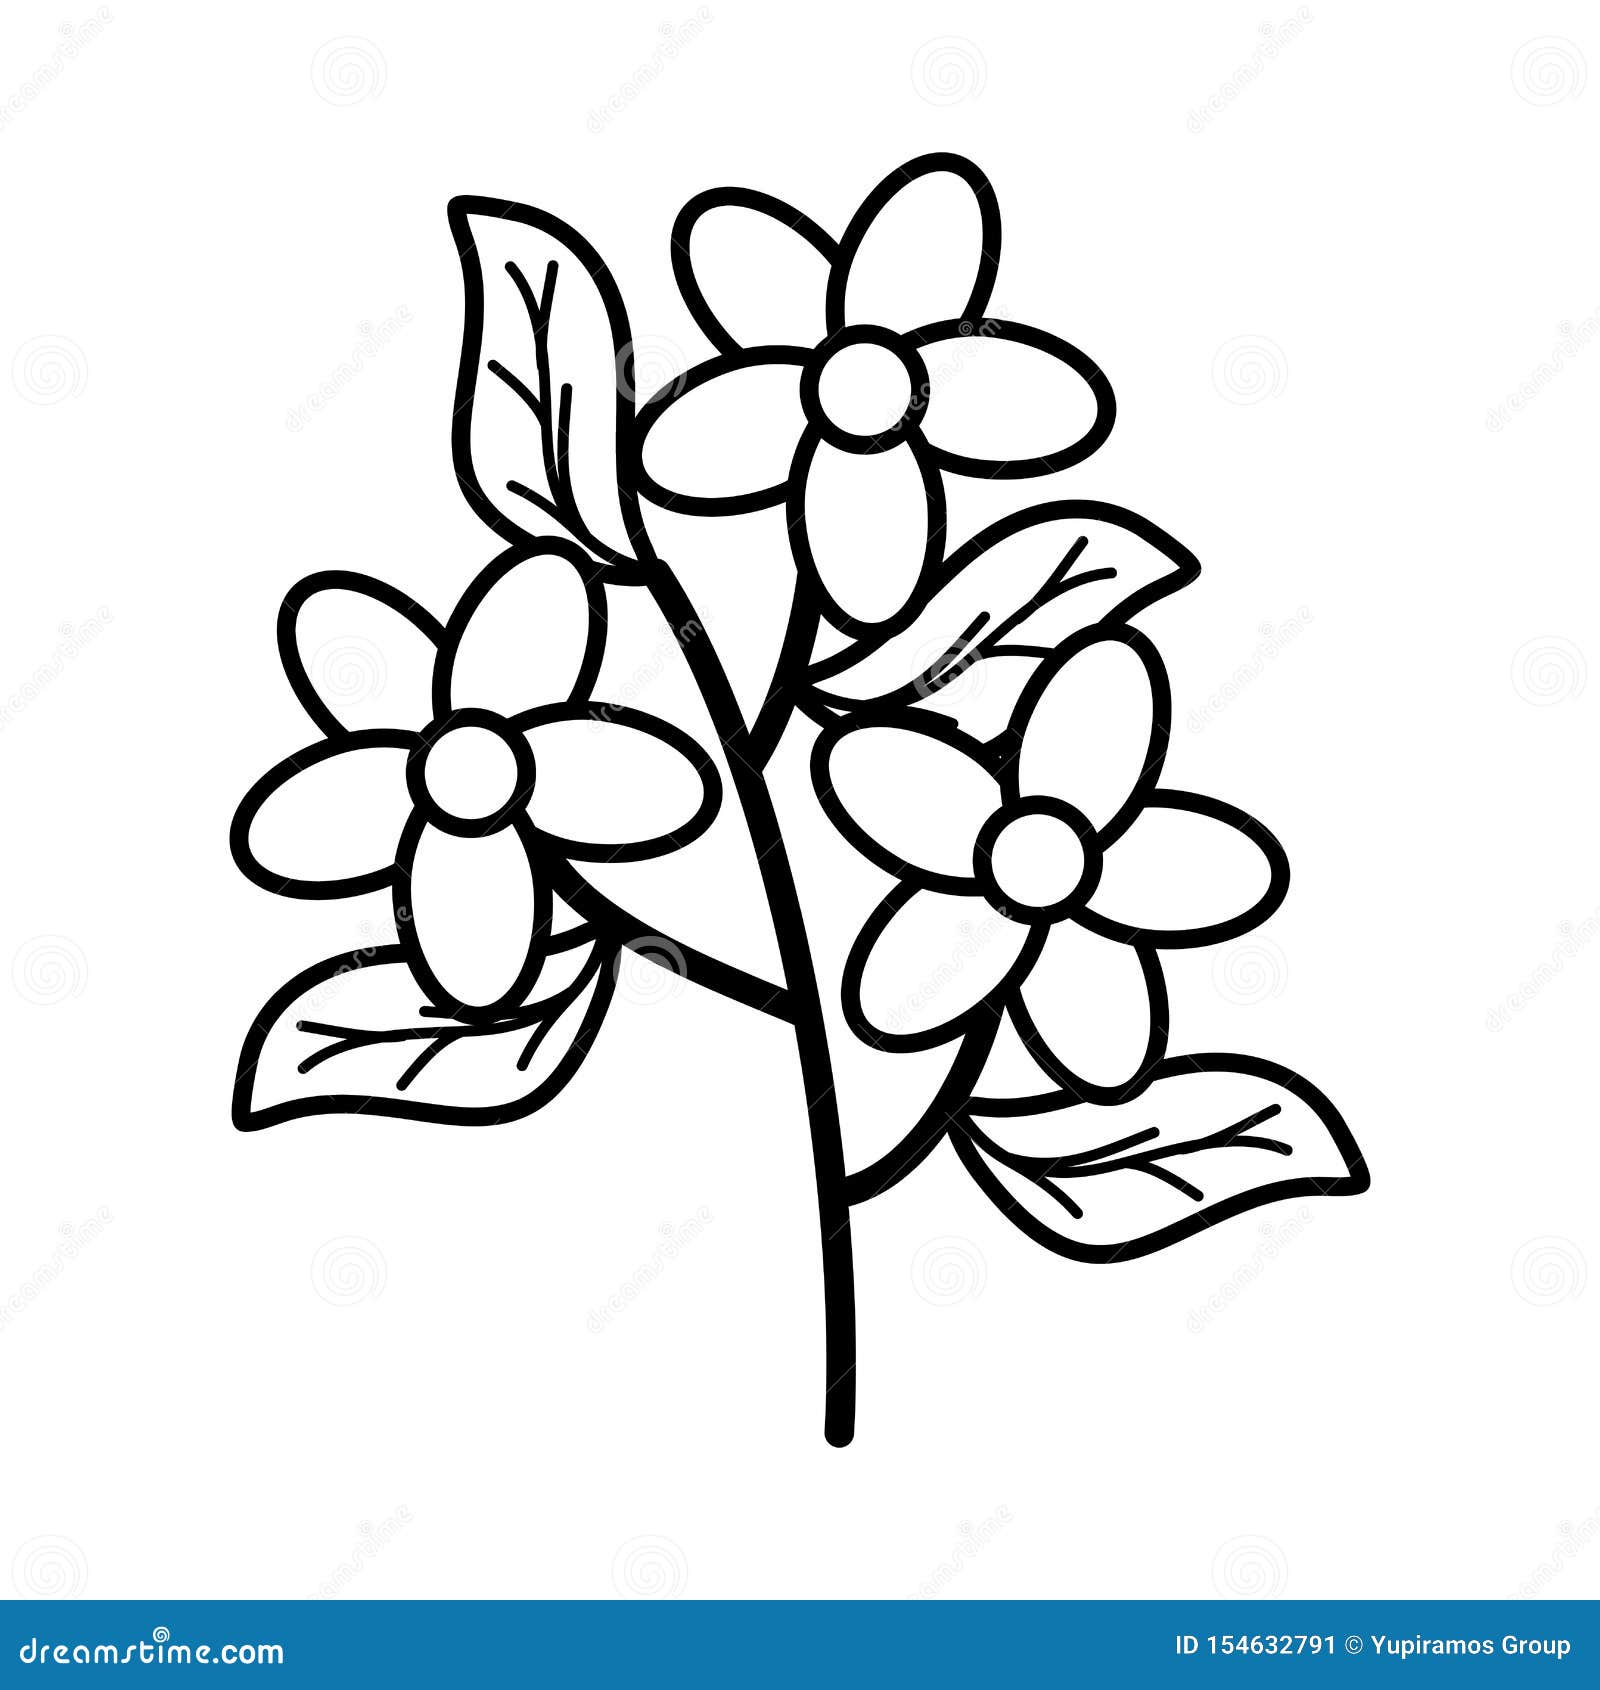 Cute Flowers And Leafs Garden Plant Decorative Icon Stock ...